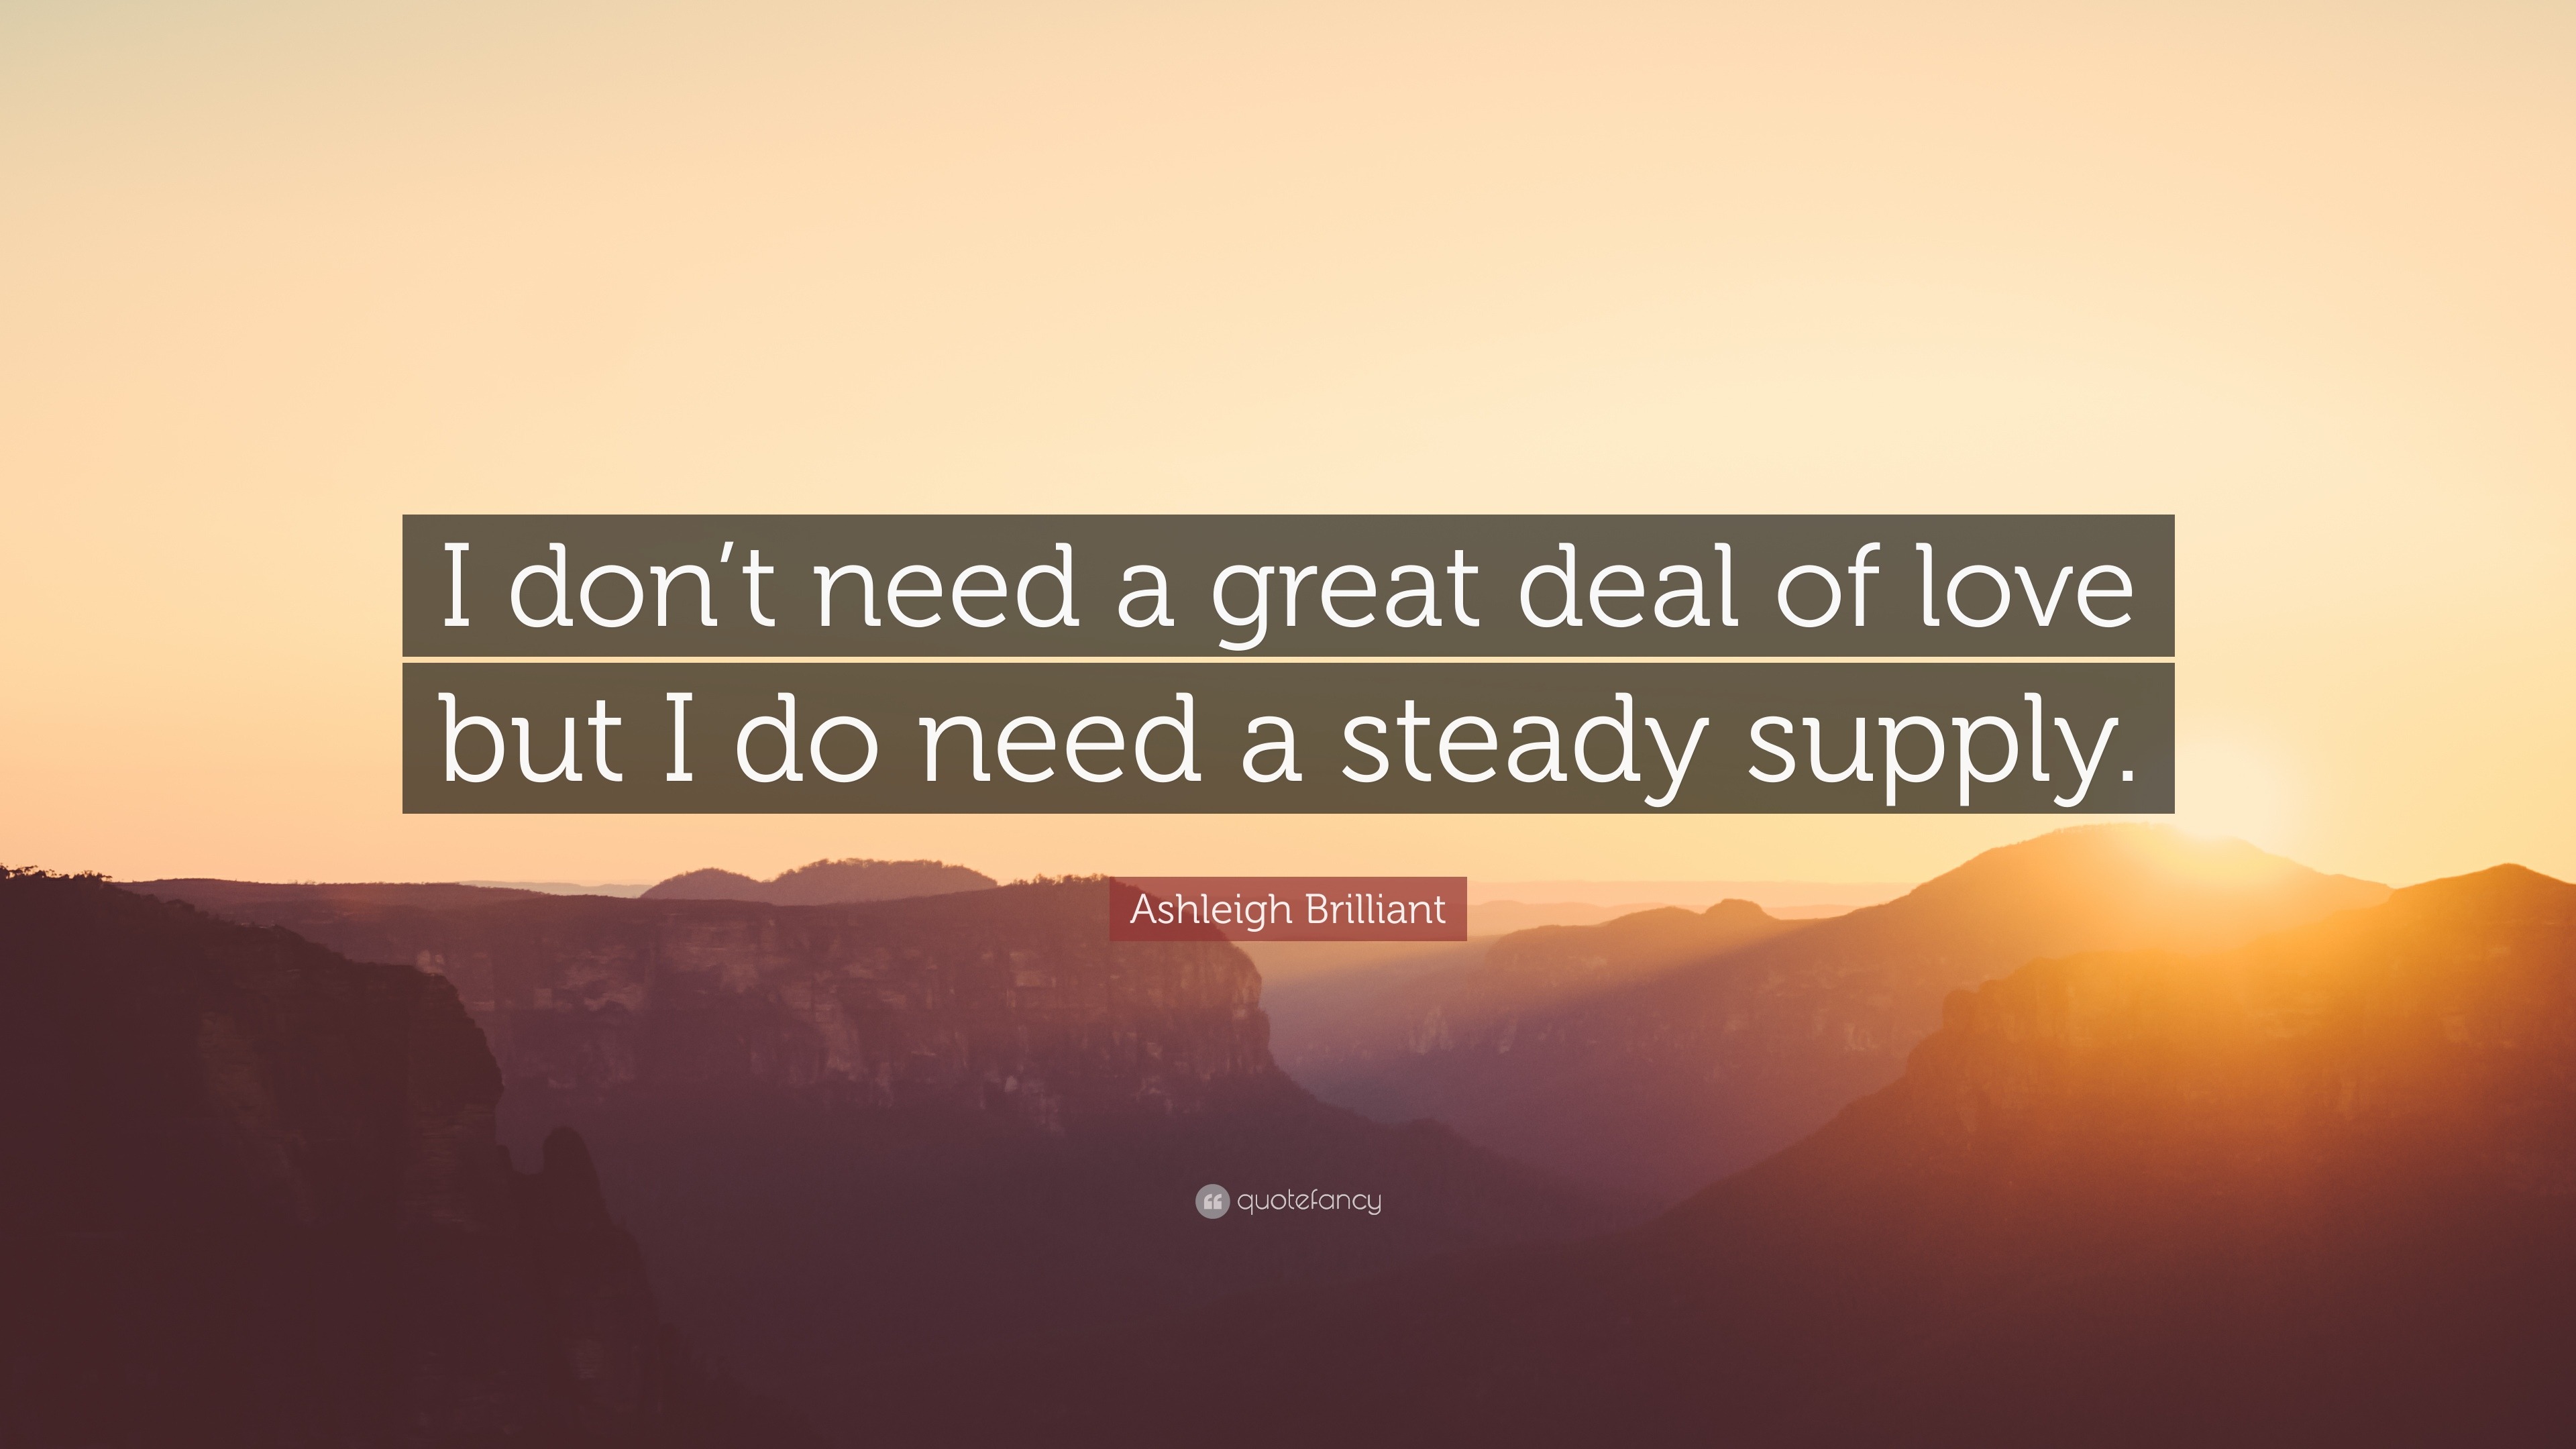 Ashleigh Brilliant Quote “I don t need a great deal of love but